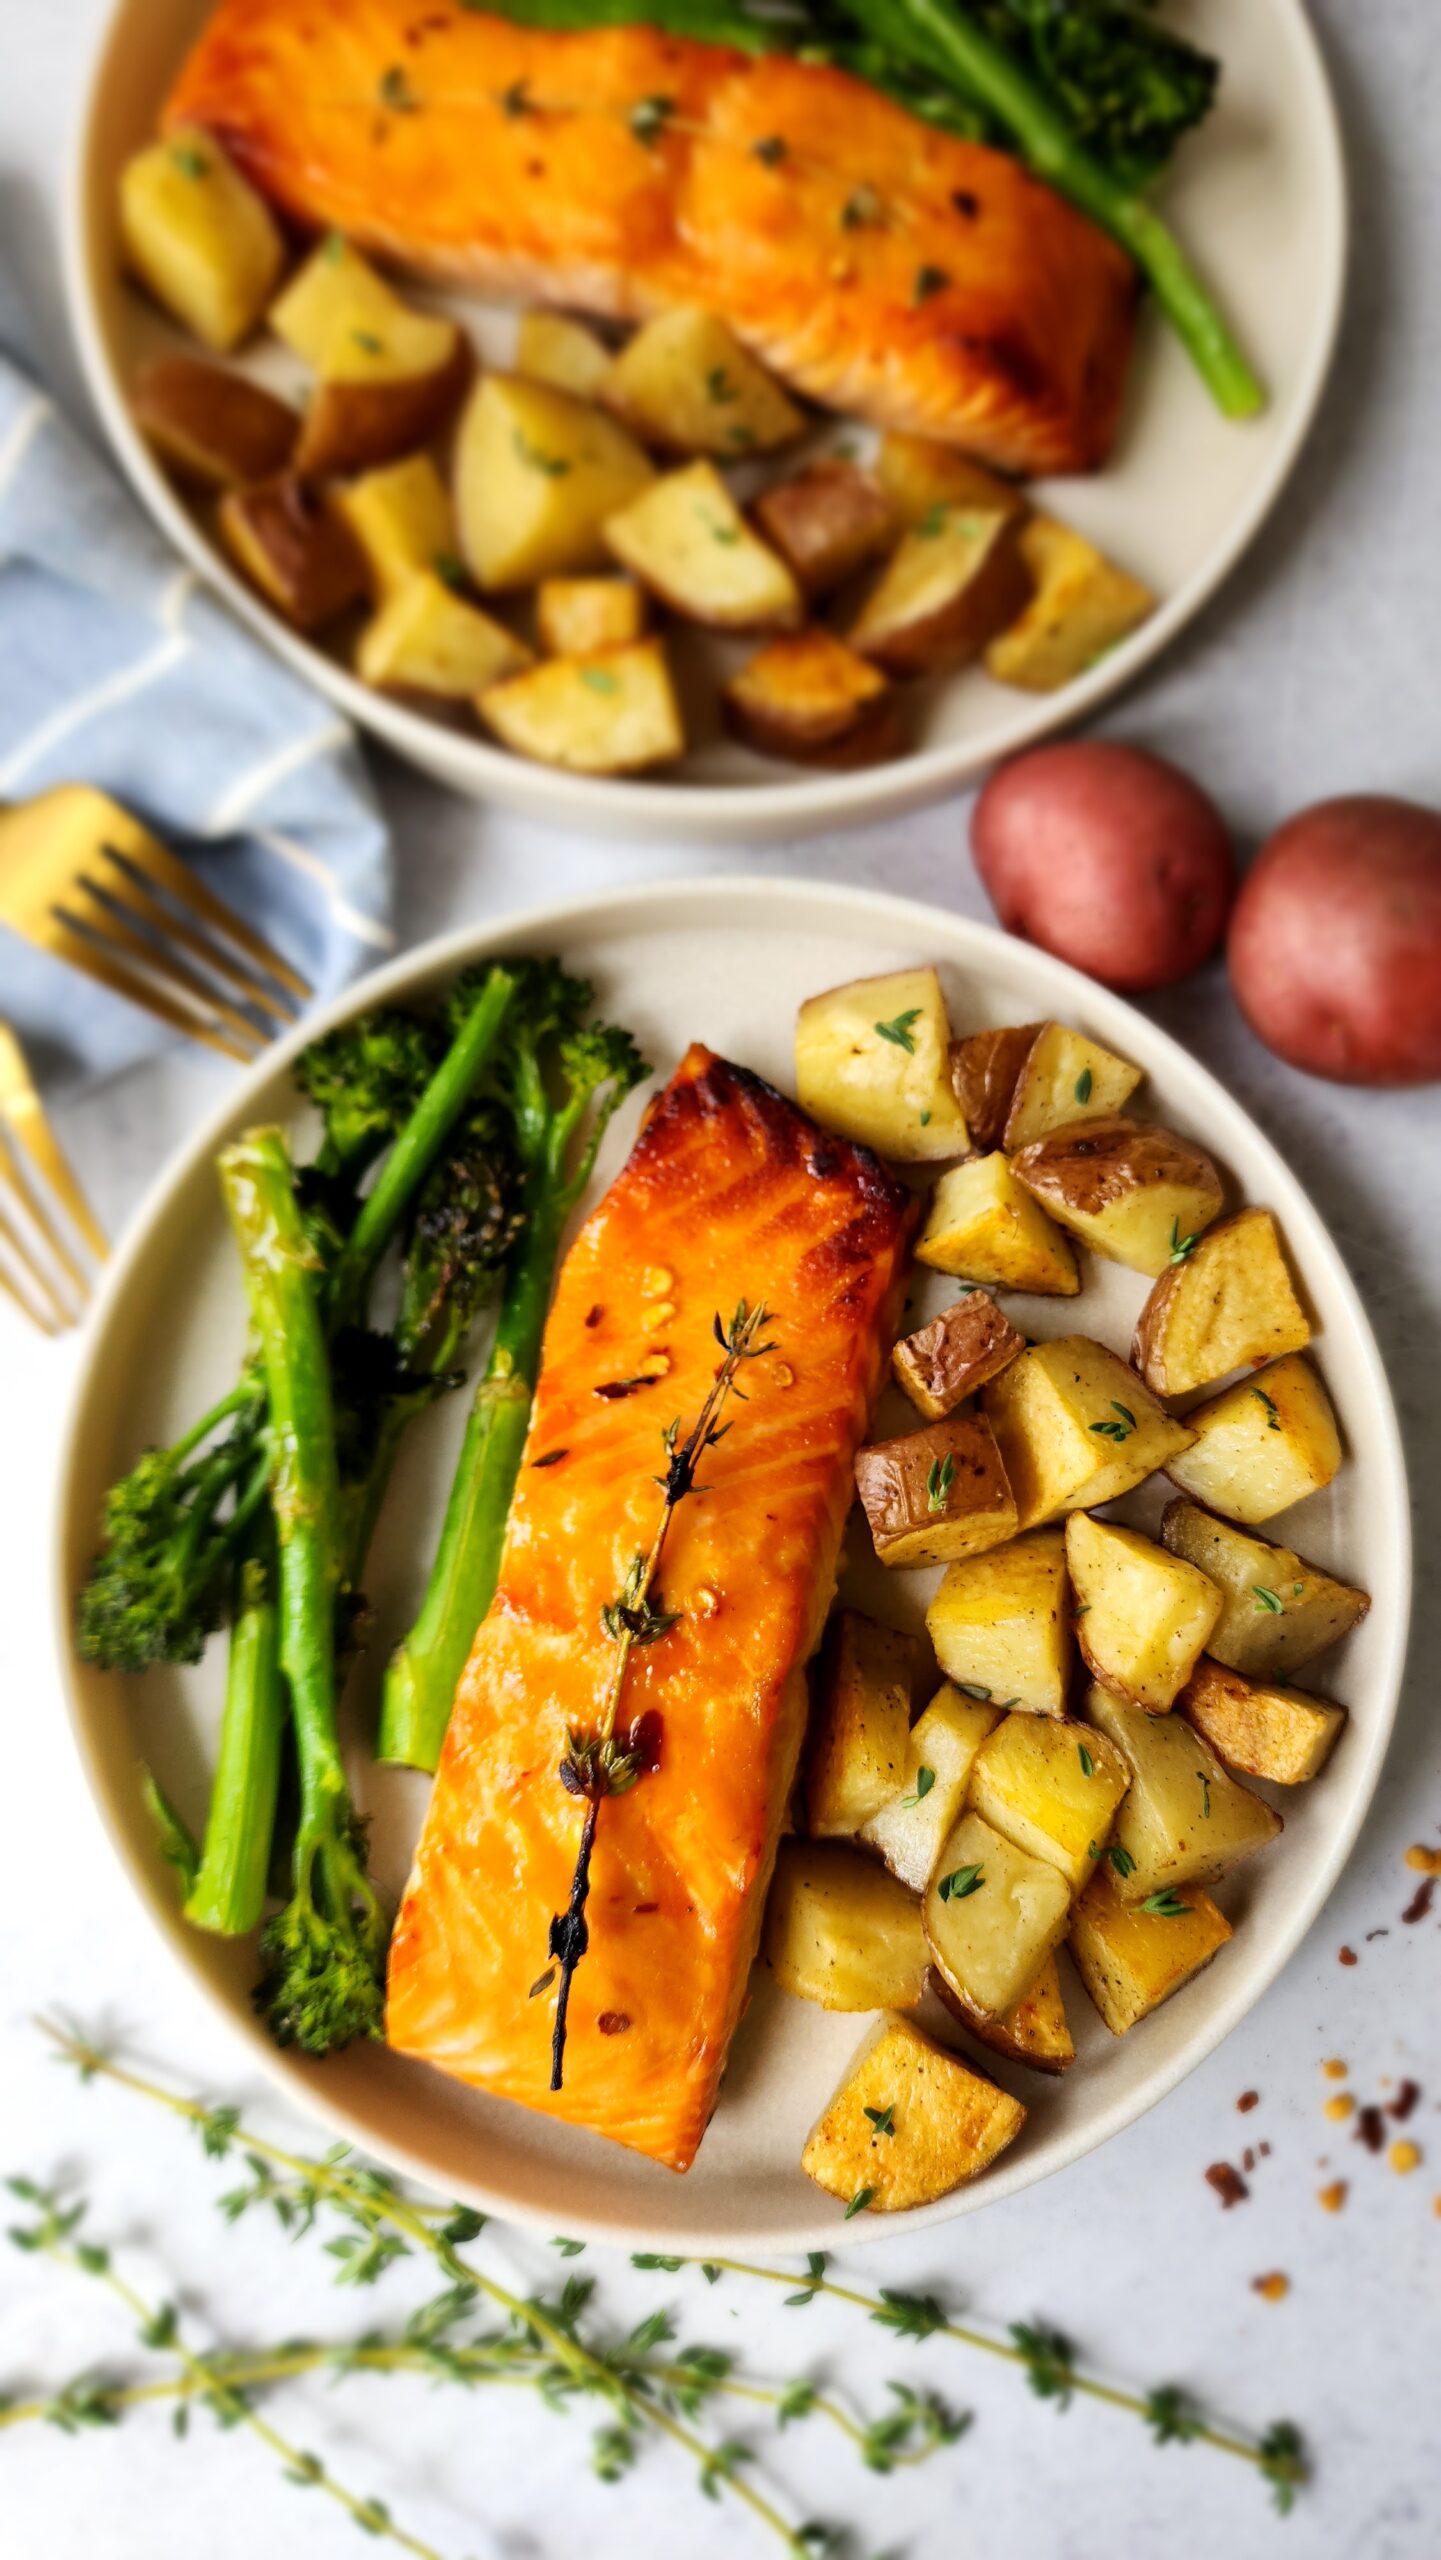 Plated Honey-Dijon Roasted Salmon with roasted potatoes and broccolini